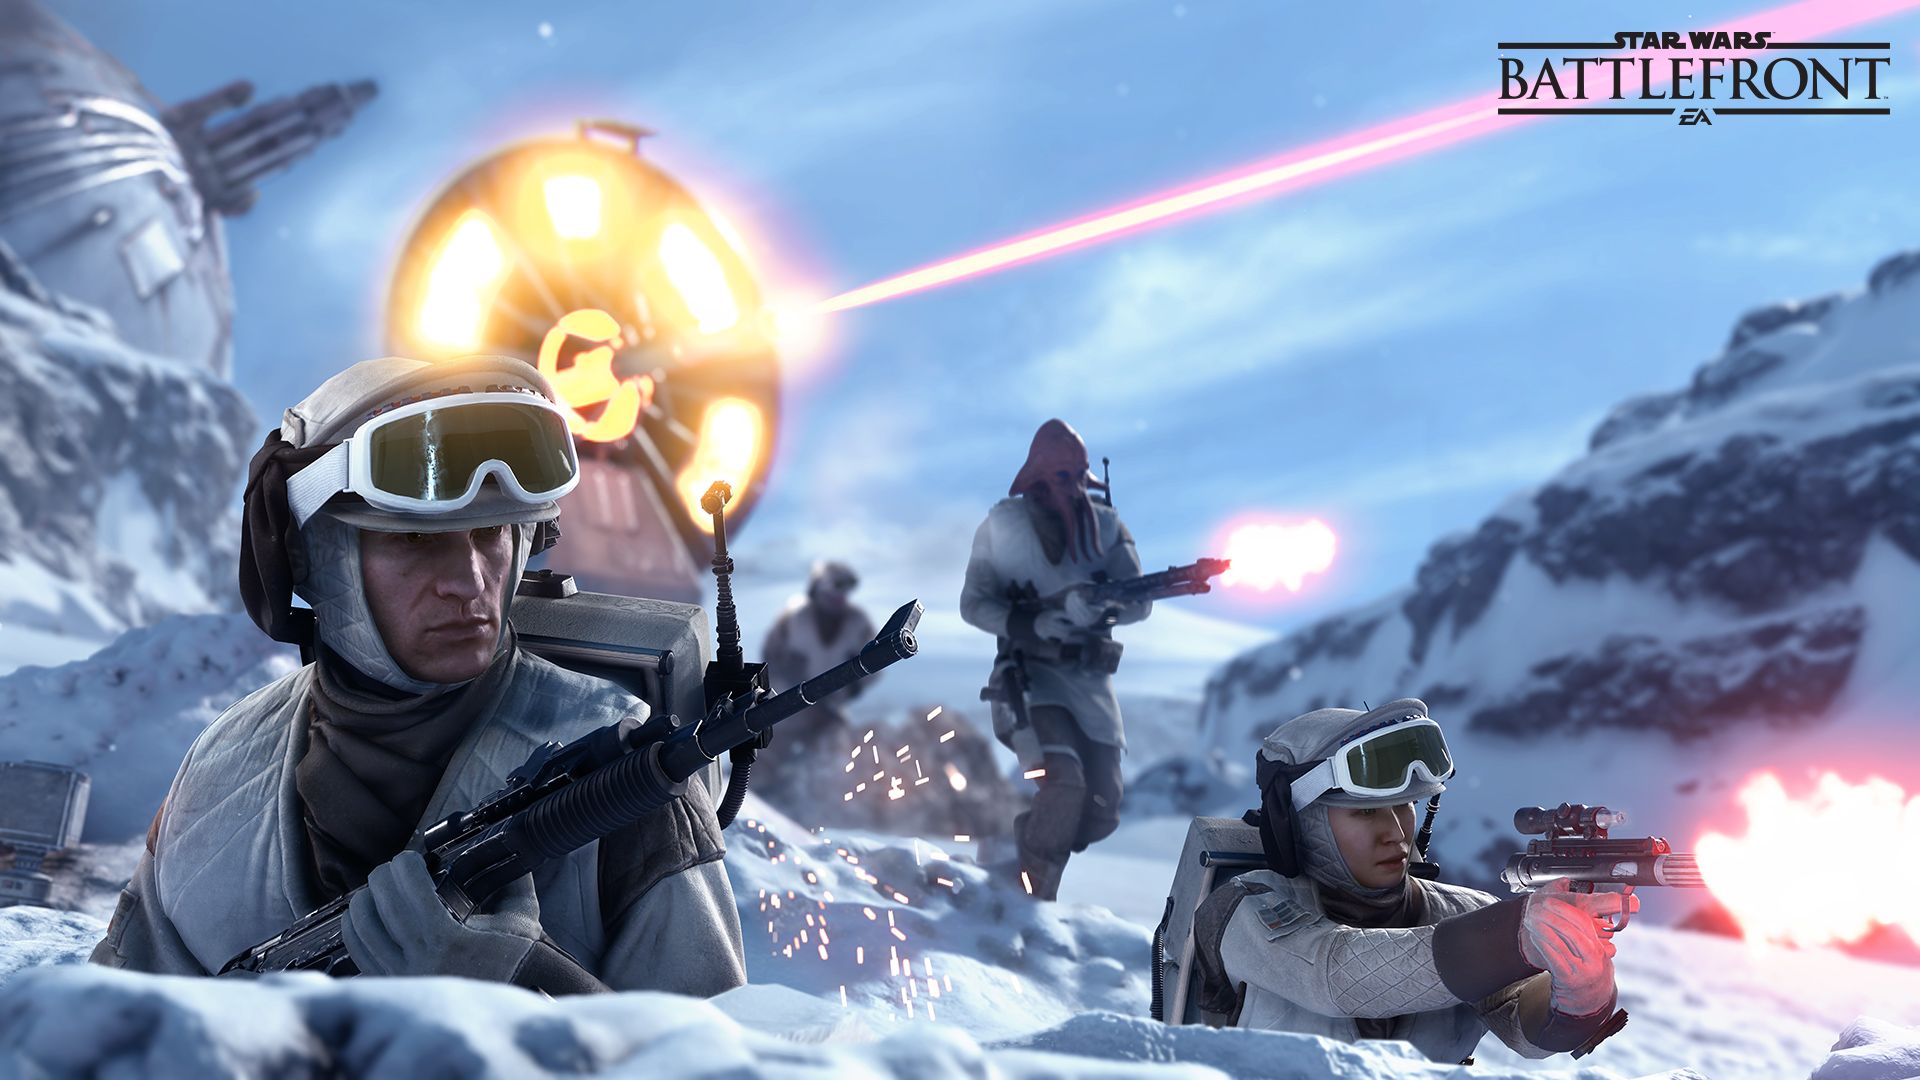 Free download Star Wars Battlefront 3 2015 Themepack With 4 HD Wallpaper [1920x1080] for your Desktop, Mobile & Tablet. Explore Star Wars Battlefront Desktop Wallpaper. Star Wars Battlefront Wallpaper